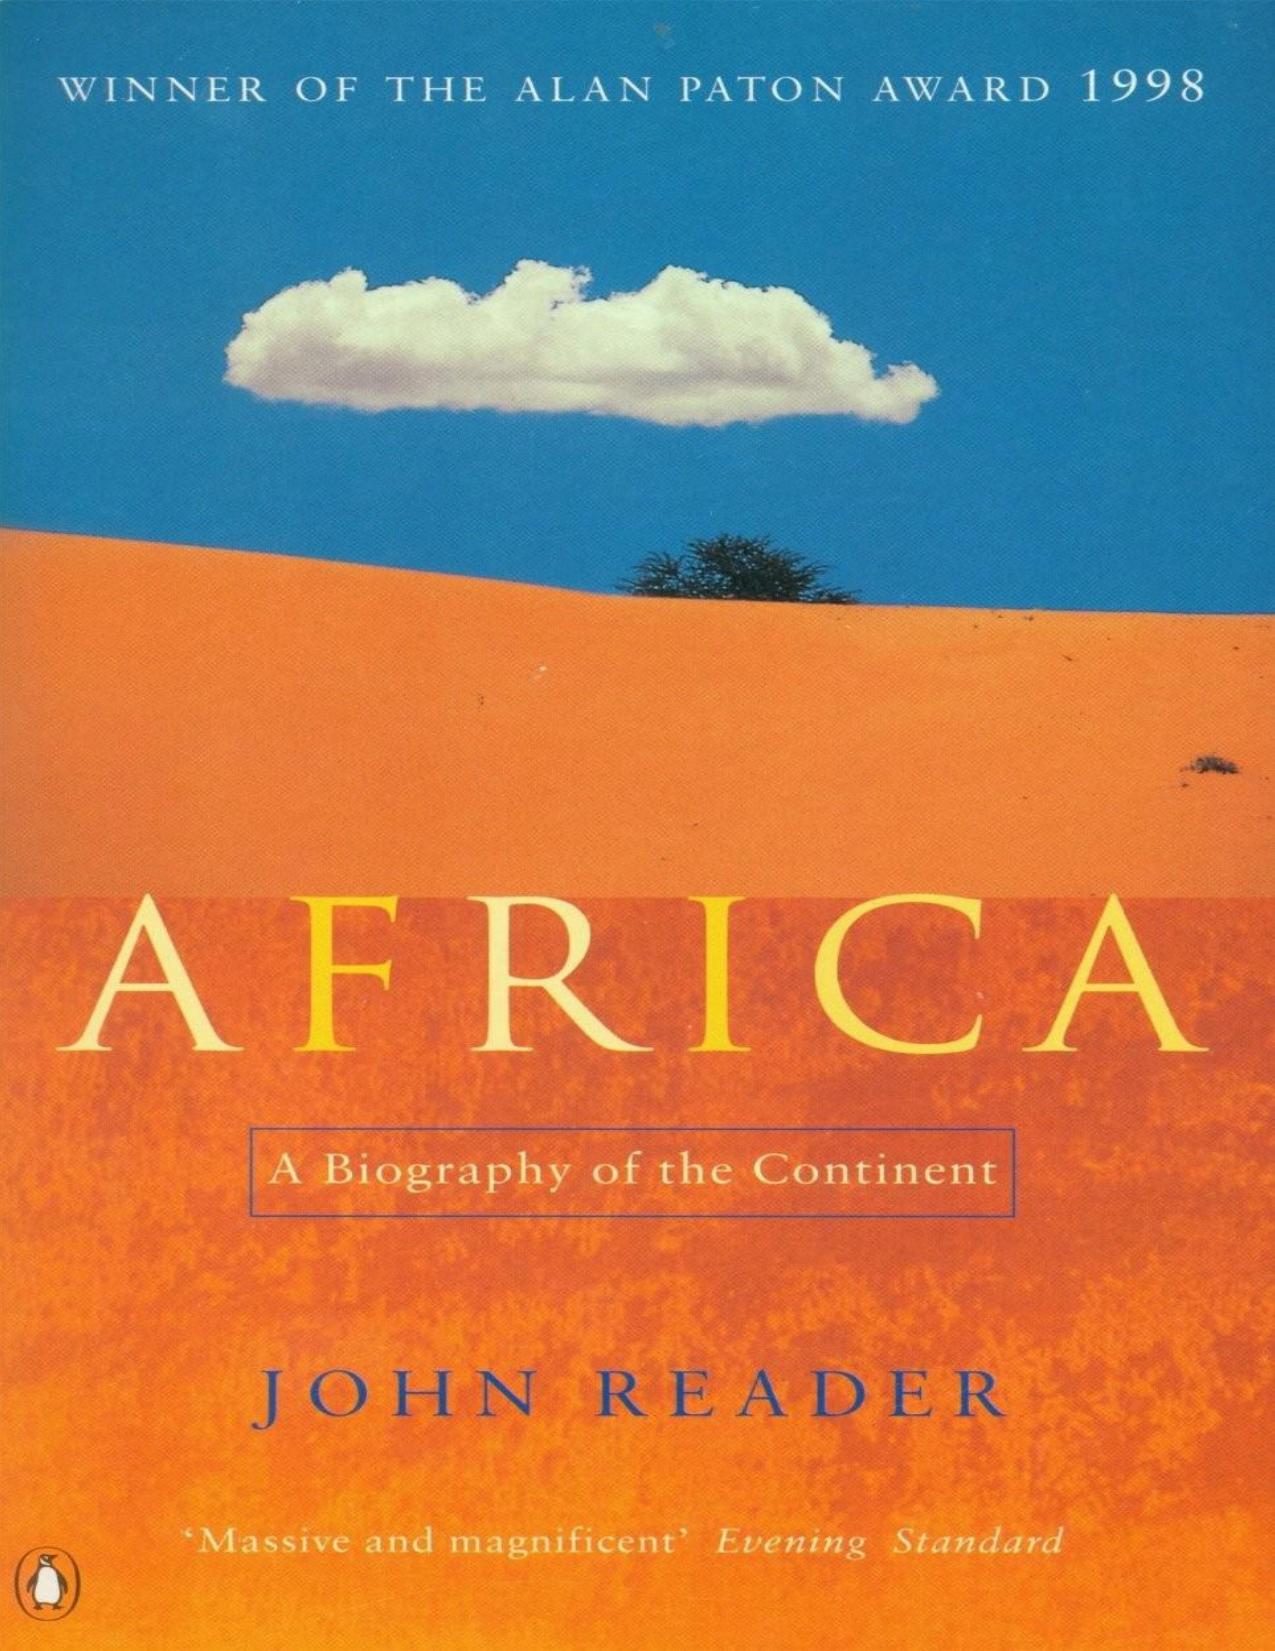 Africa: A Biography of the Continent by John Reader